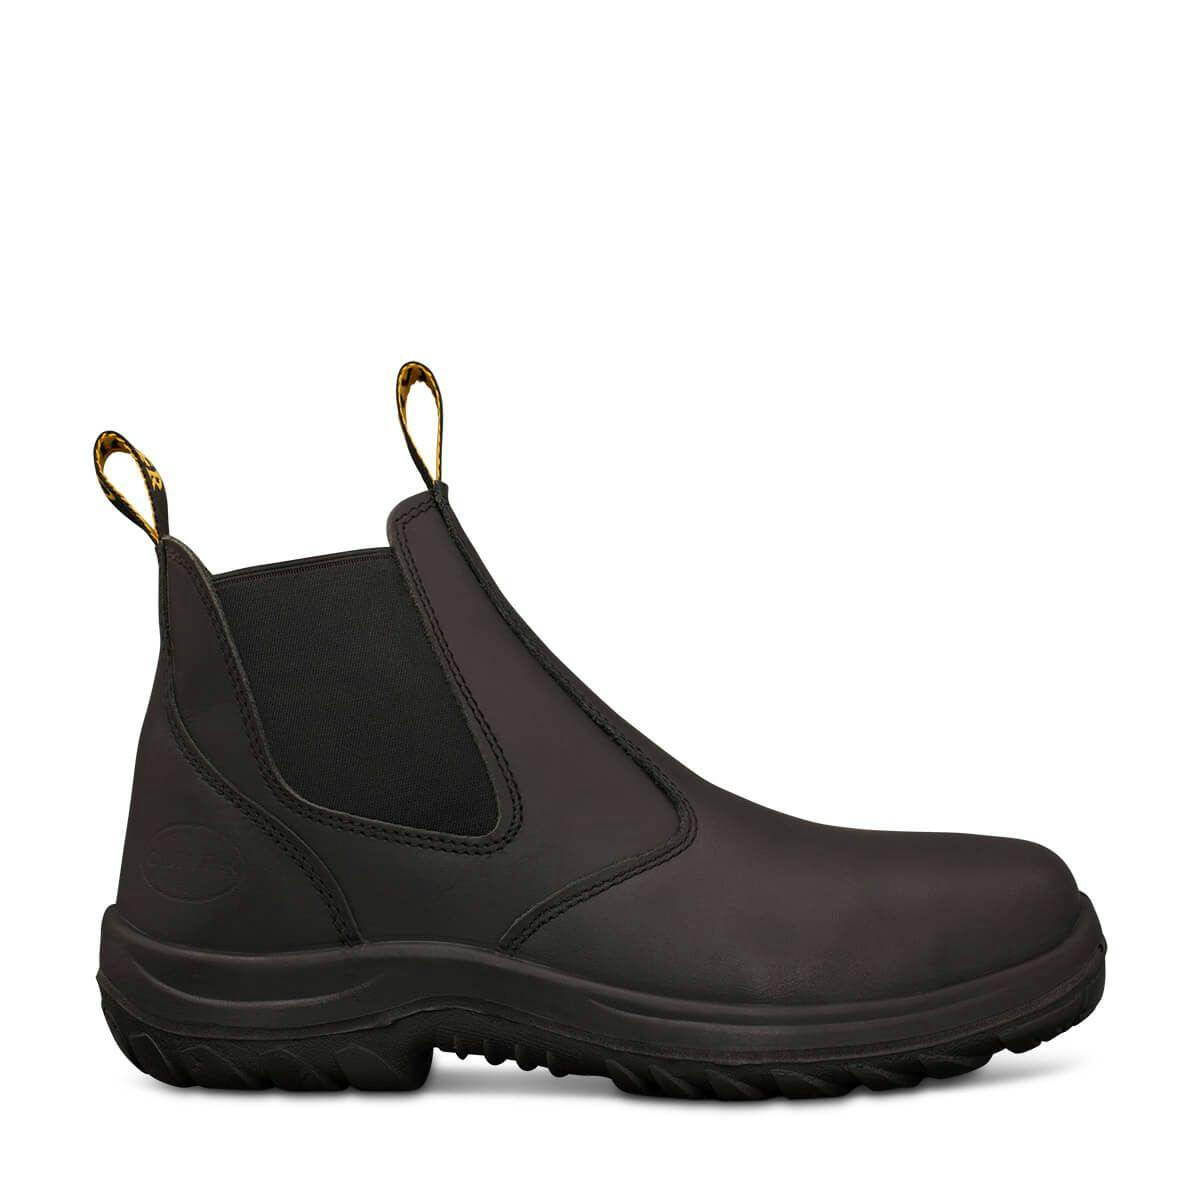 Oliver Elastic Sided Boots, Water Resistant Full Grain Leather_2